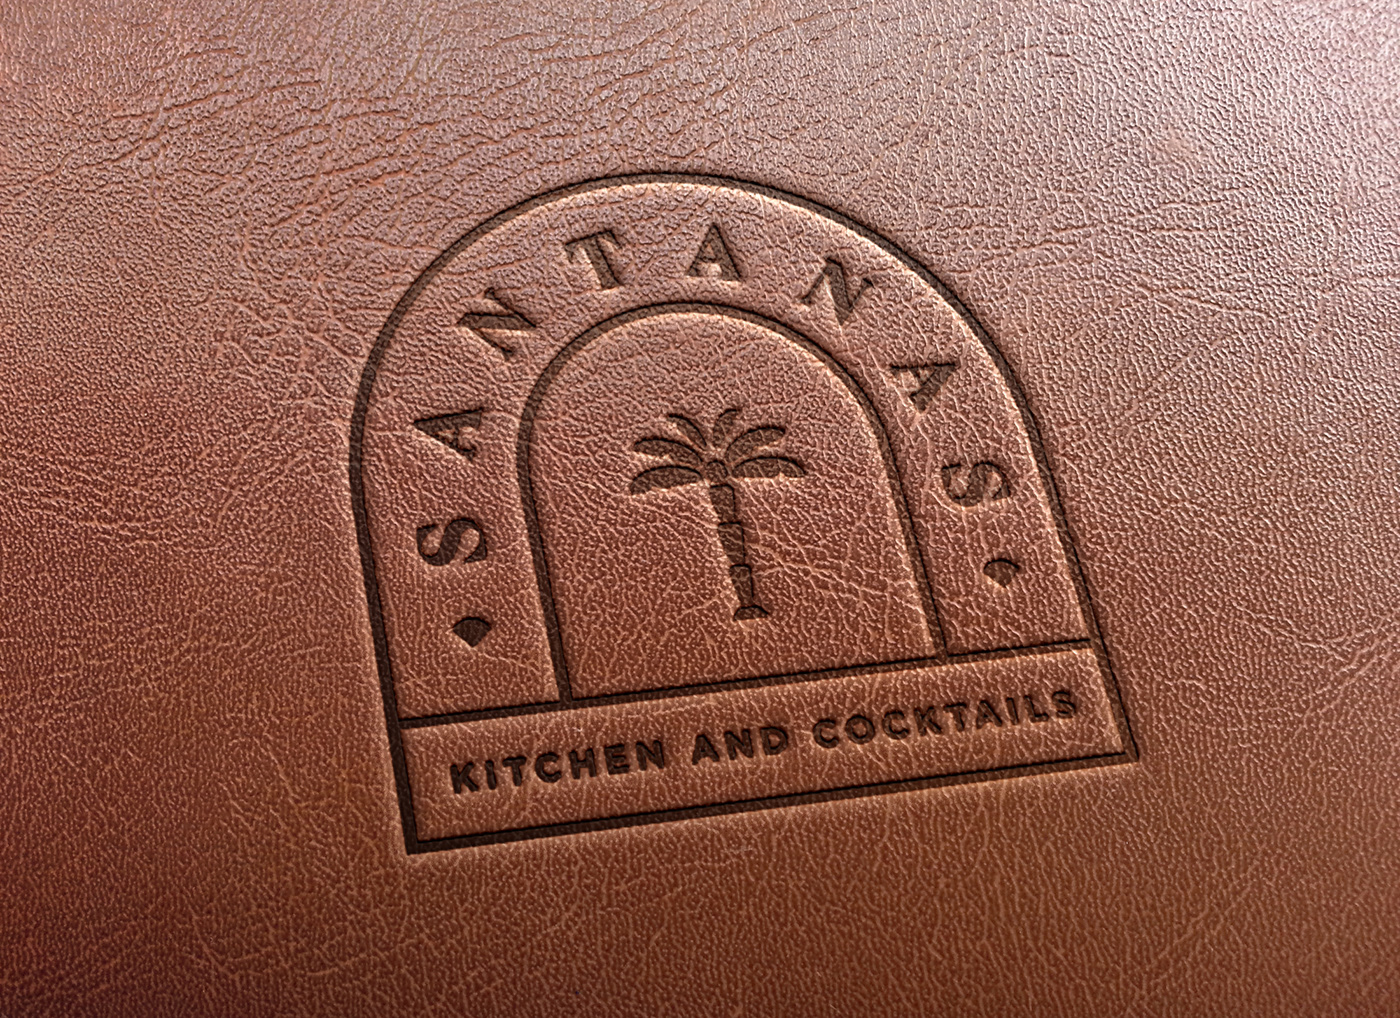 Gilded emblem logo of a tropical themed latin restaurant embossed on a leather surface